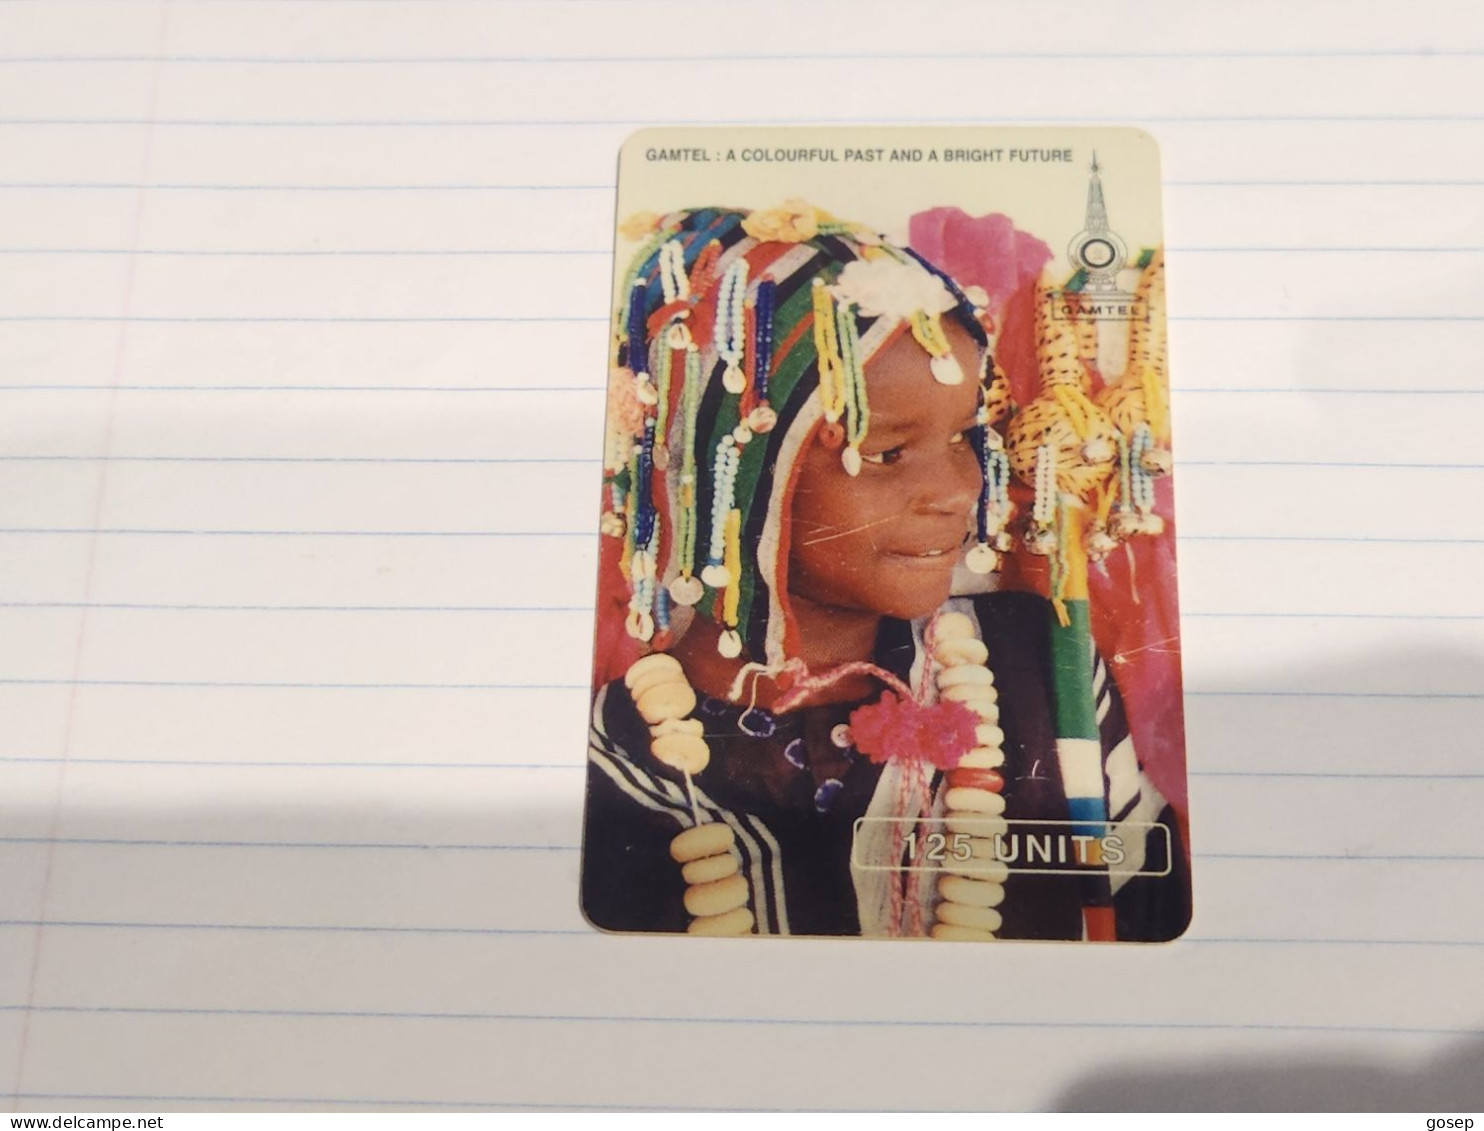 GAMBIA-(GAM-010B)-Young Girl In Colourful Dress-Old Schlumberger-(14)(125units)-(00788331)-used Card+1card Prepiad Free - Gambia